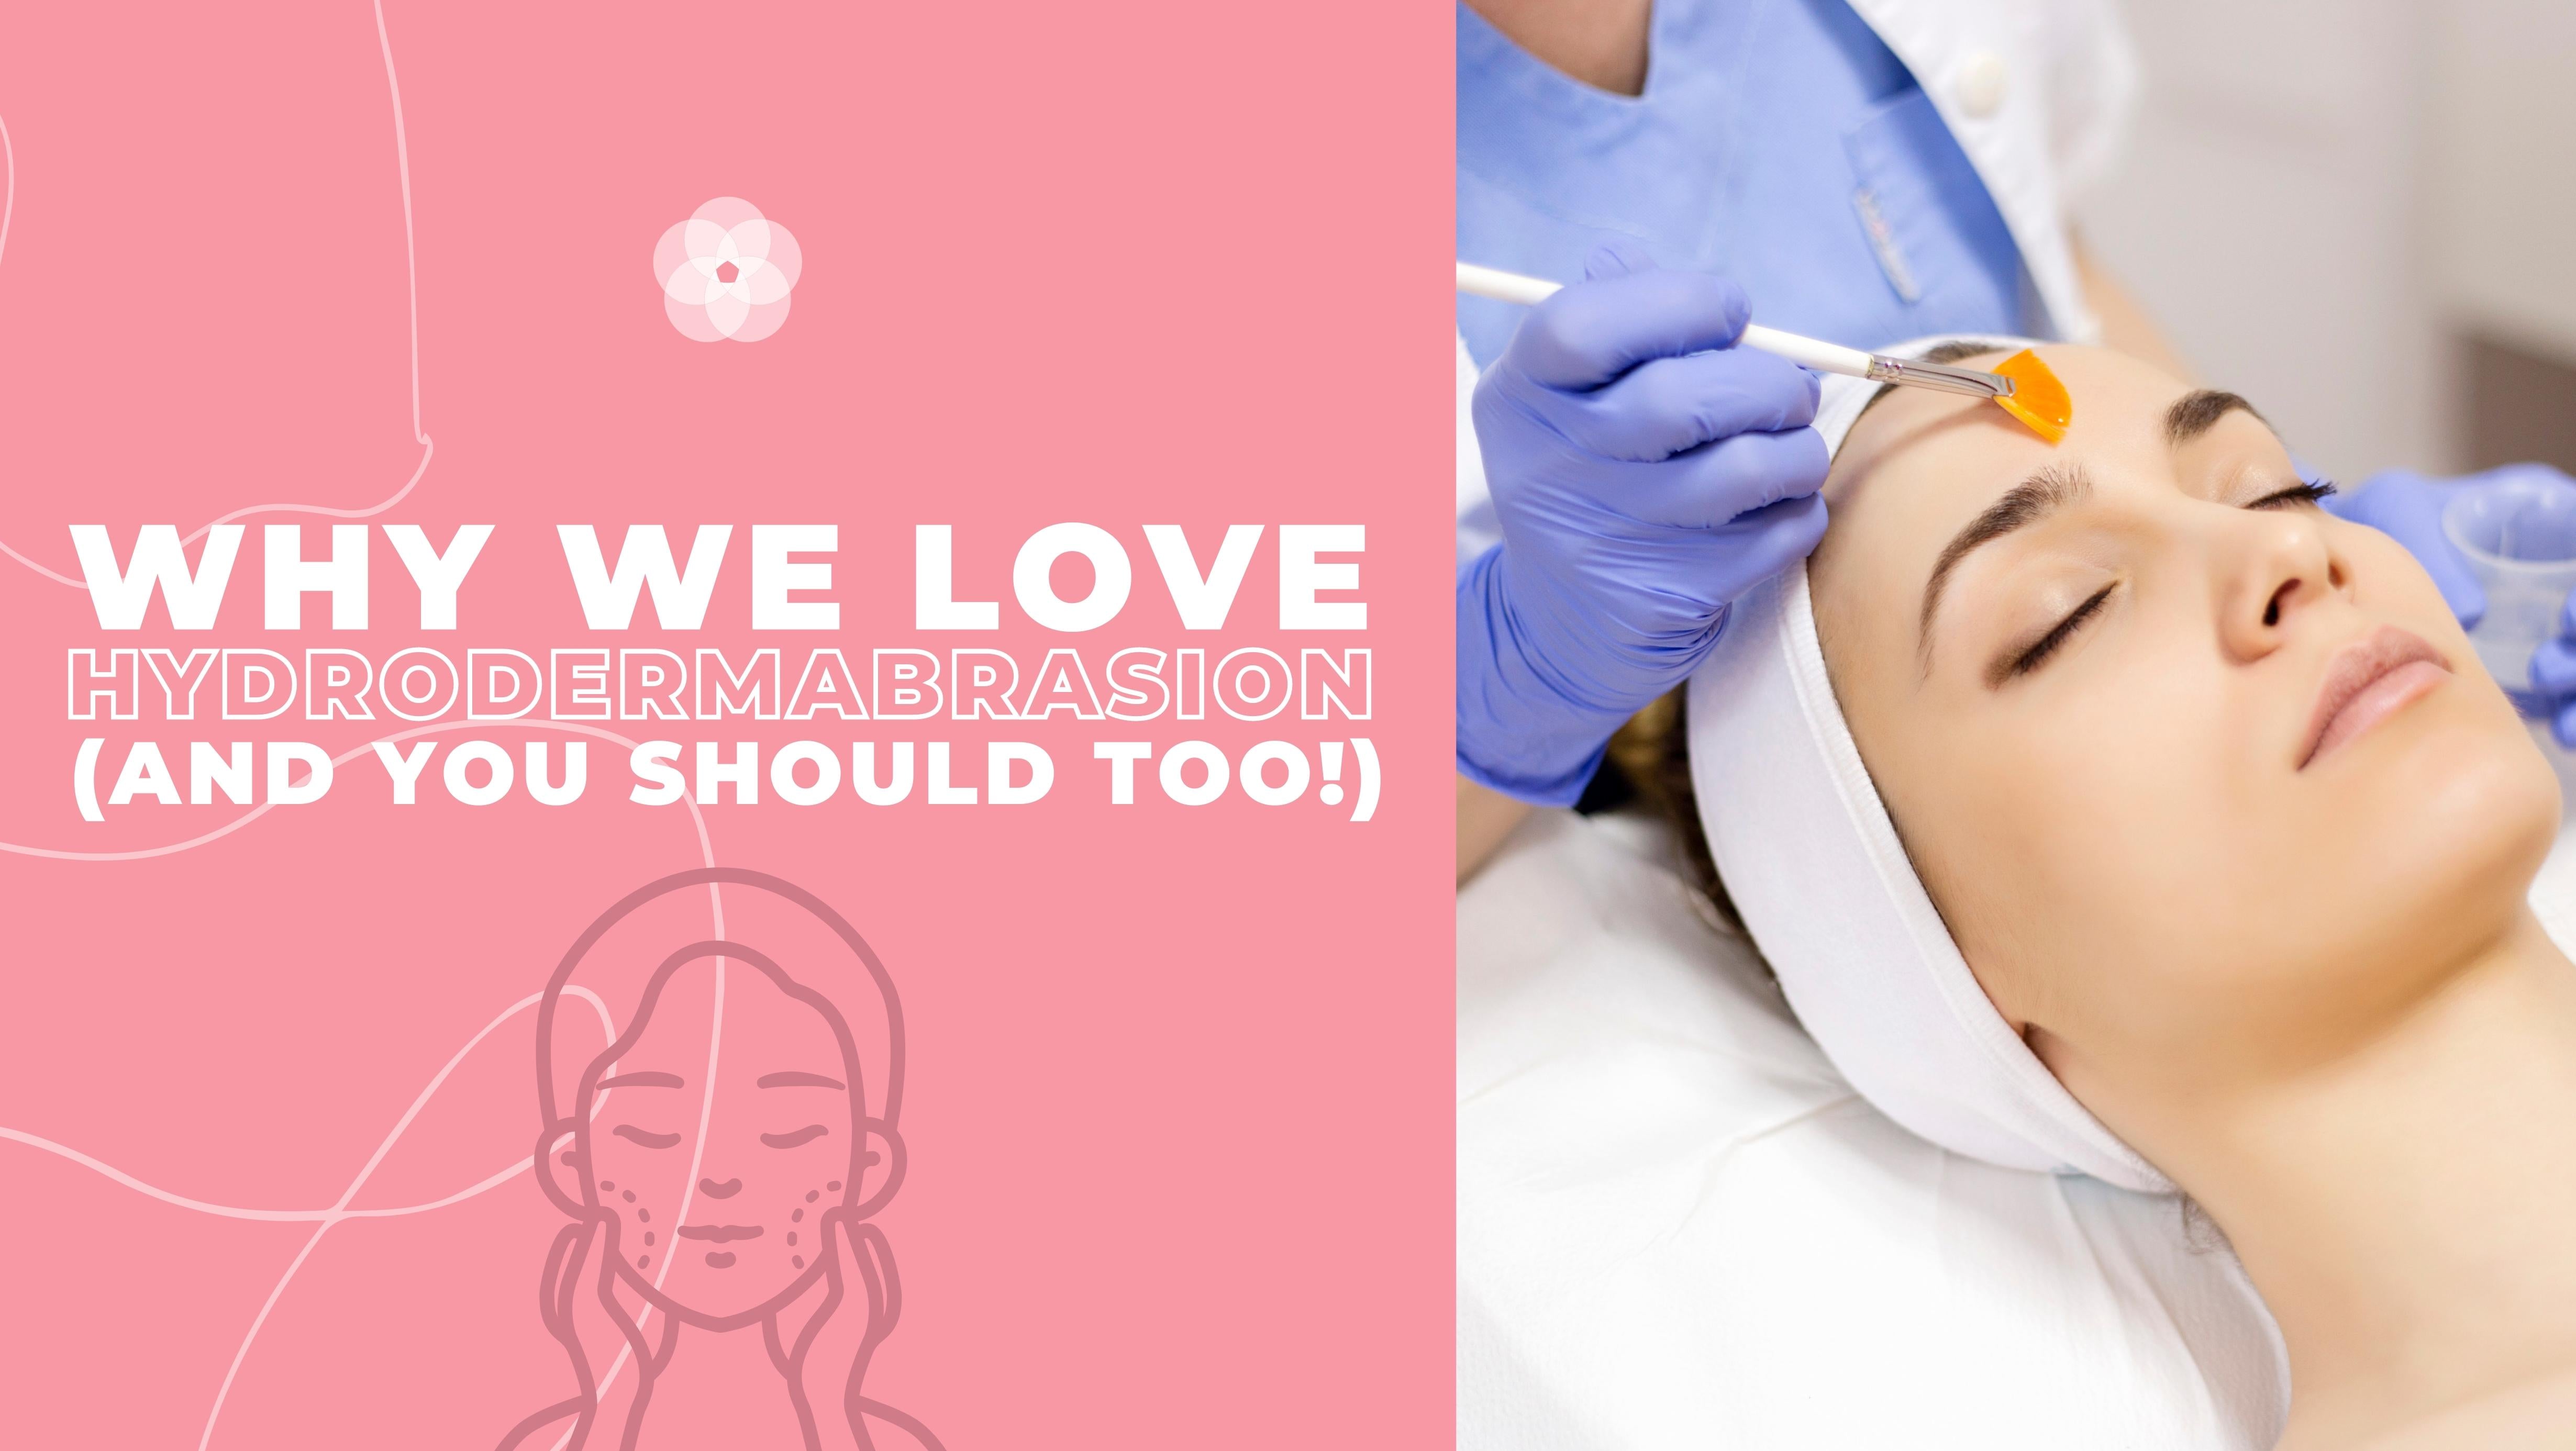 Why We Love Hydrodermabrasion (And You Should Too!)